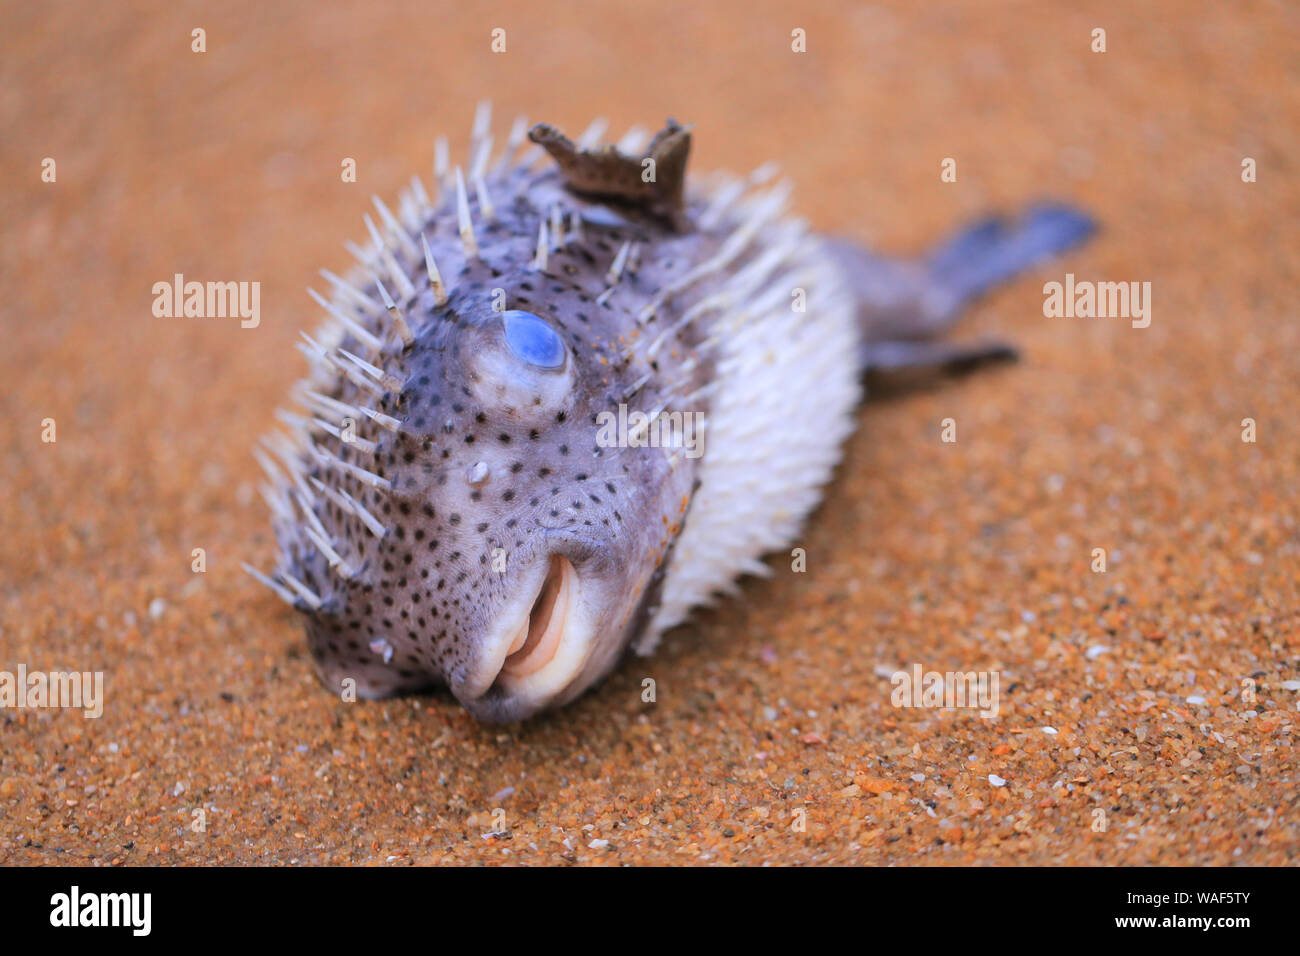 Dead puffer fish on the sand Stock Photo - Alamy